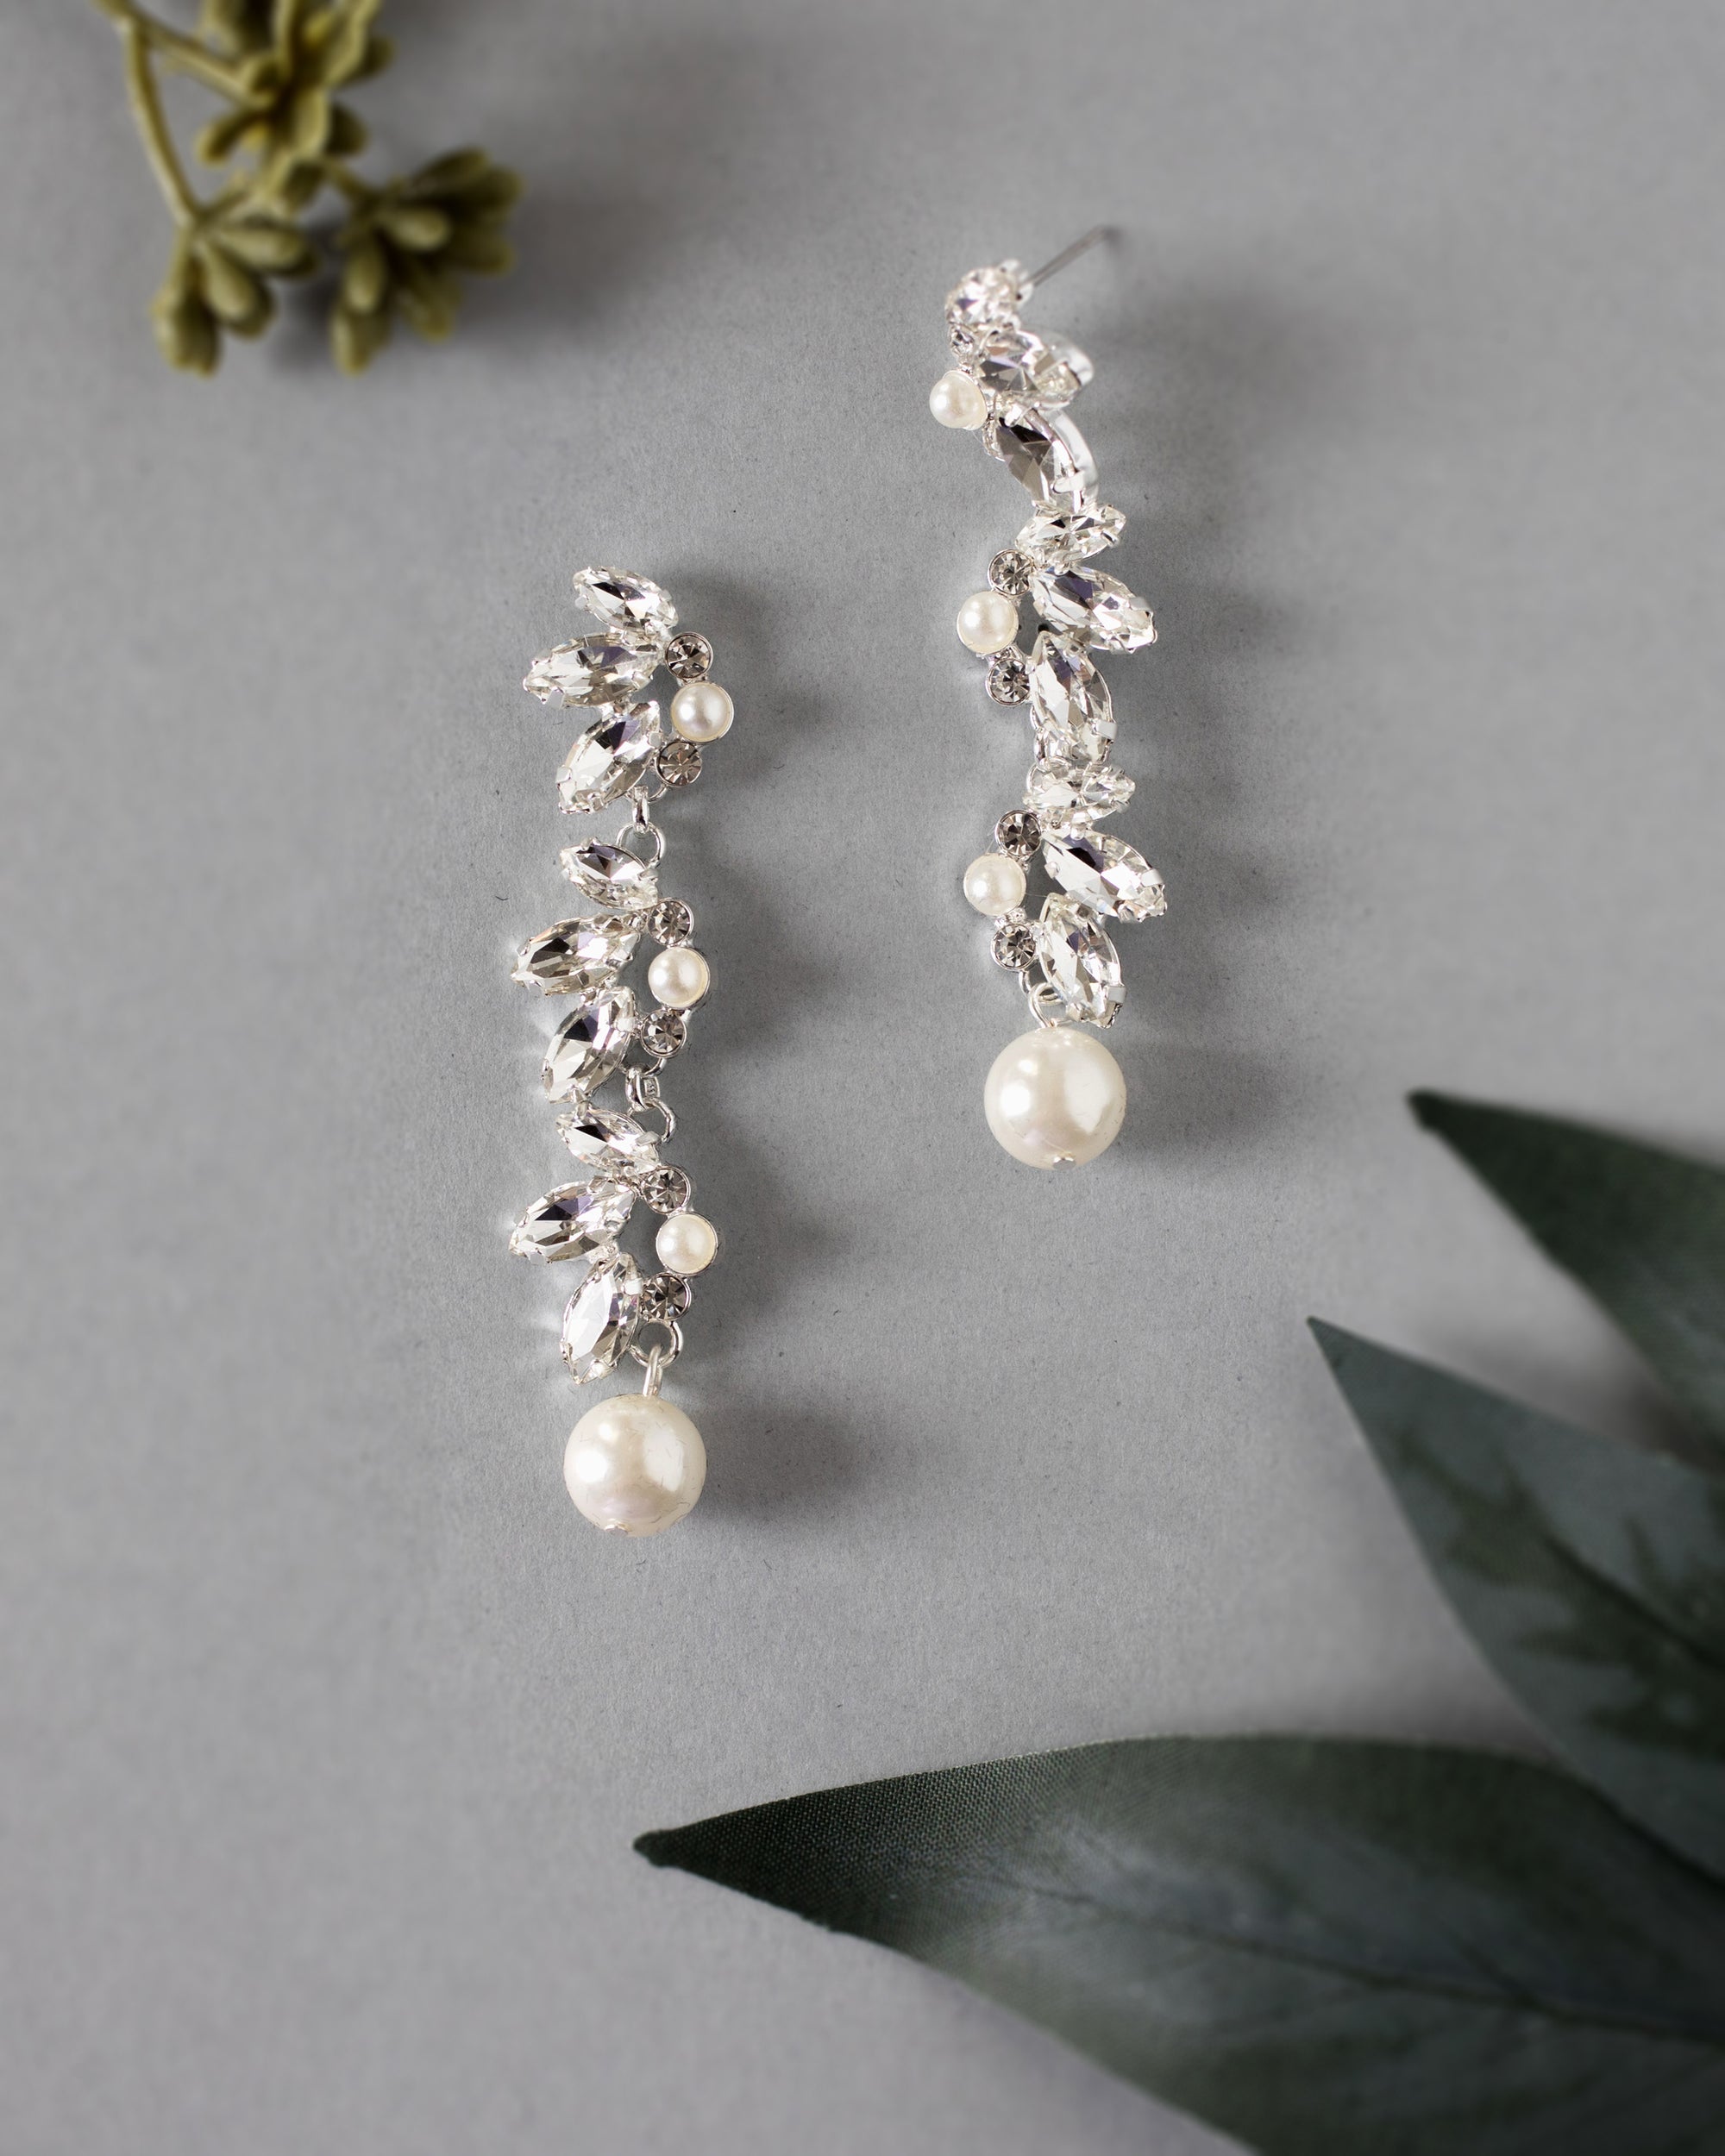 Marquise Crystal Drop Earrings with Pearls - Cassandra Lynne